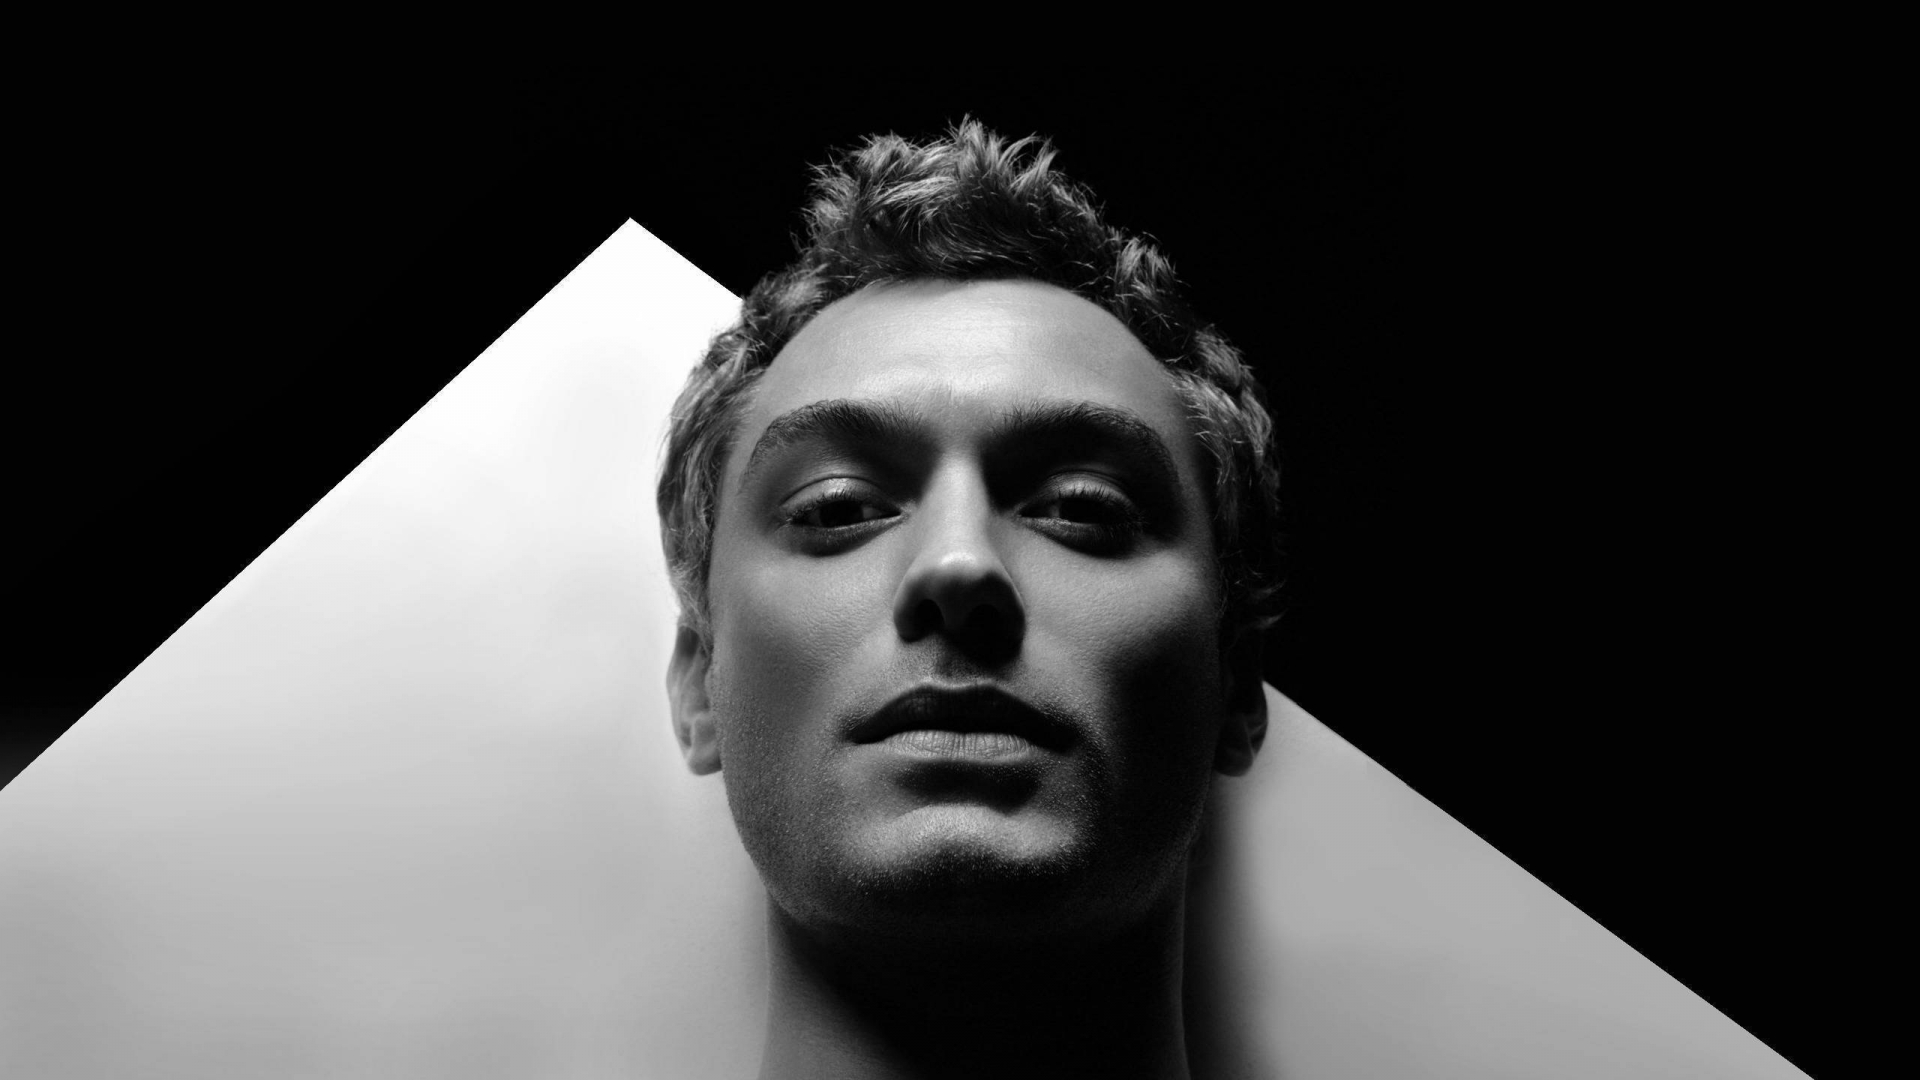 Jude Law Monochrome for 1920 x 1080 HDTV 1080p resolution